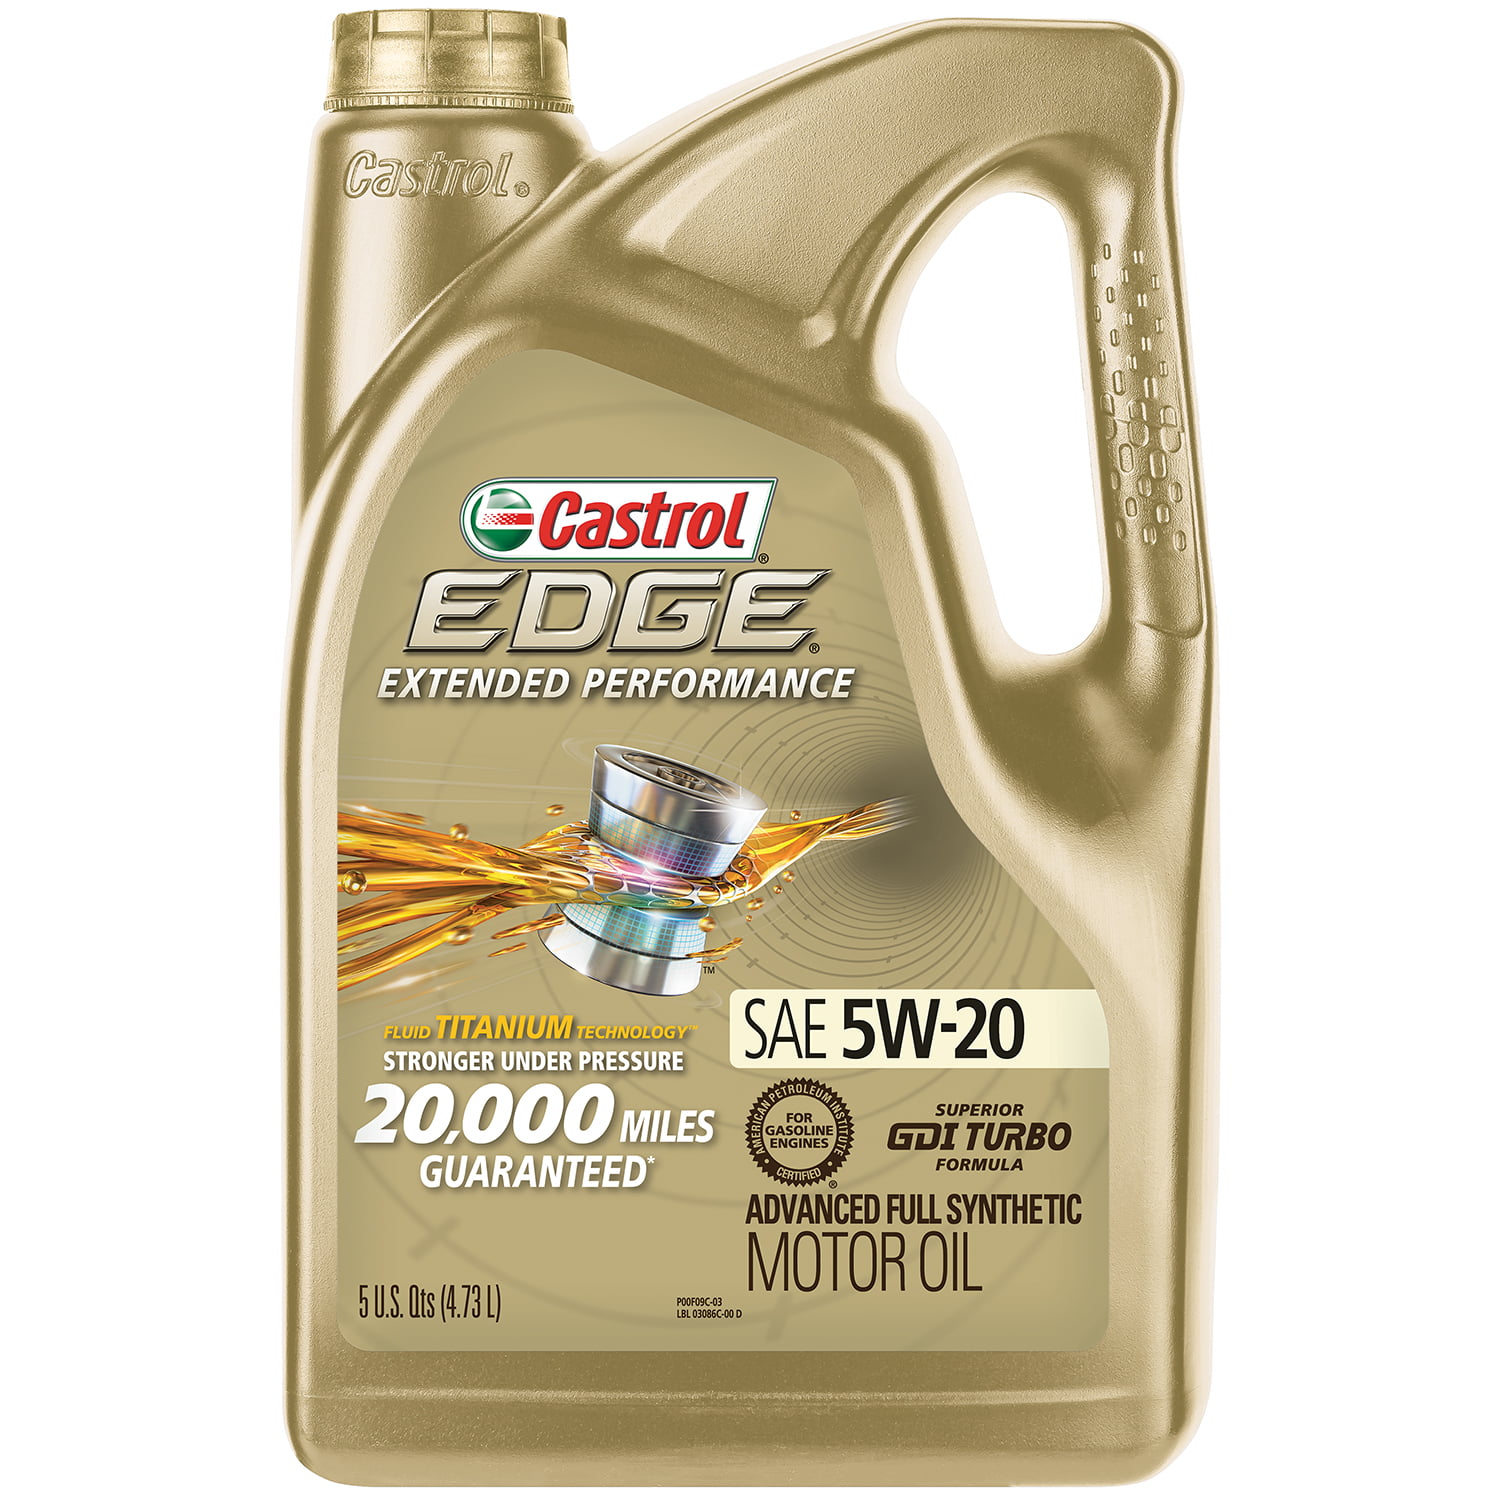 castrol-edge-extended-performance-5w-20-advanced-full-synthetic-motor